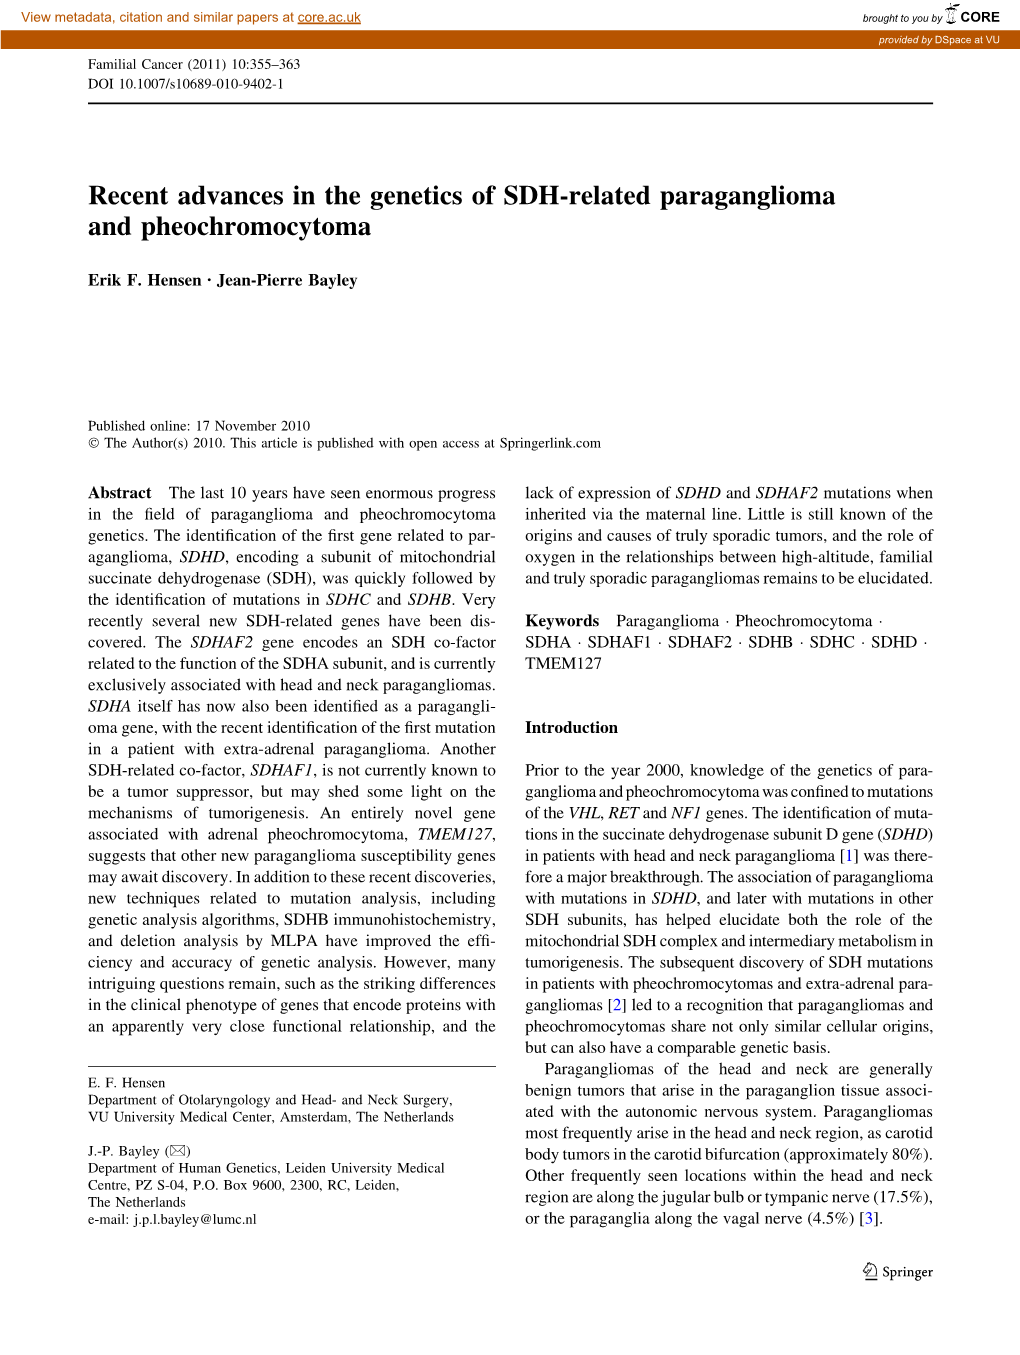 Recent Advances in the Genetics of SDH-Related Paraganglioma and Pheochromocytoma